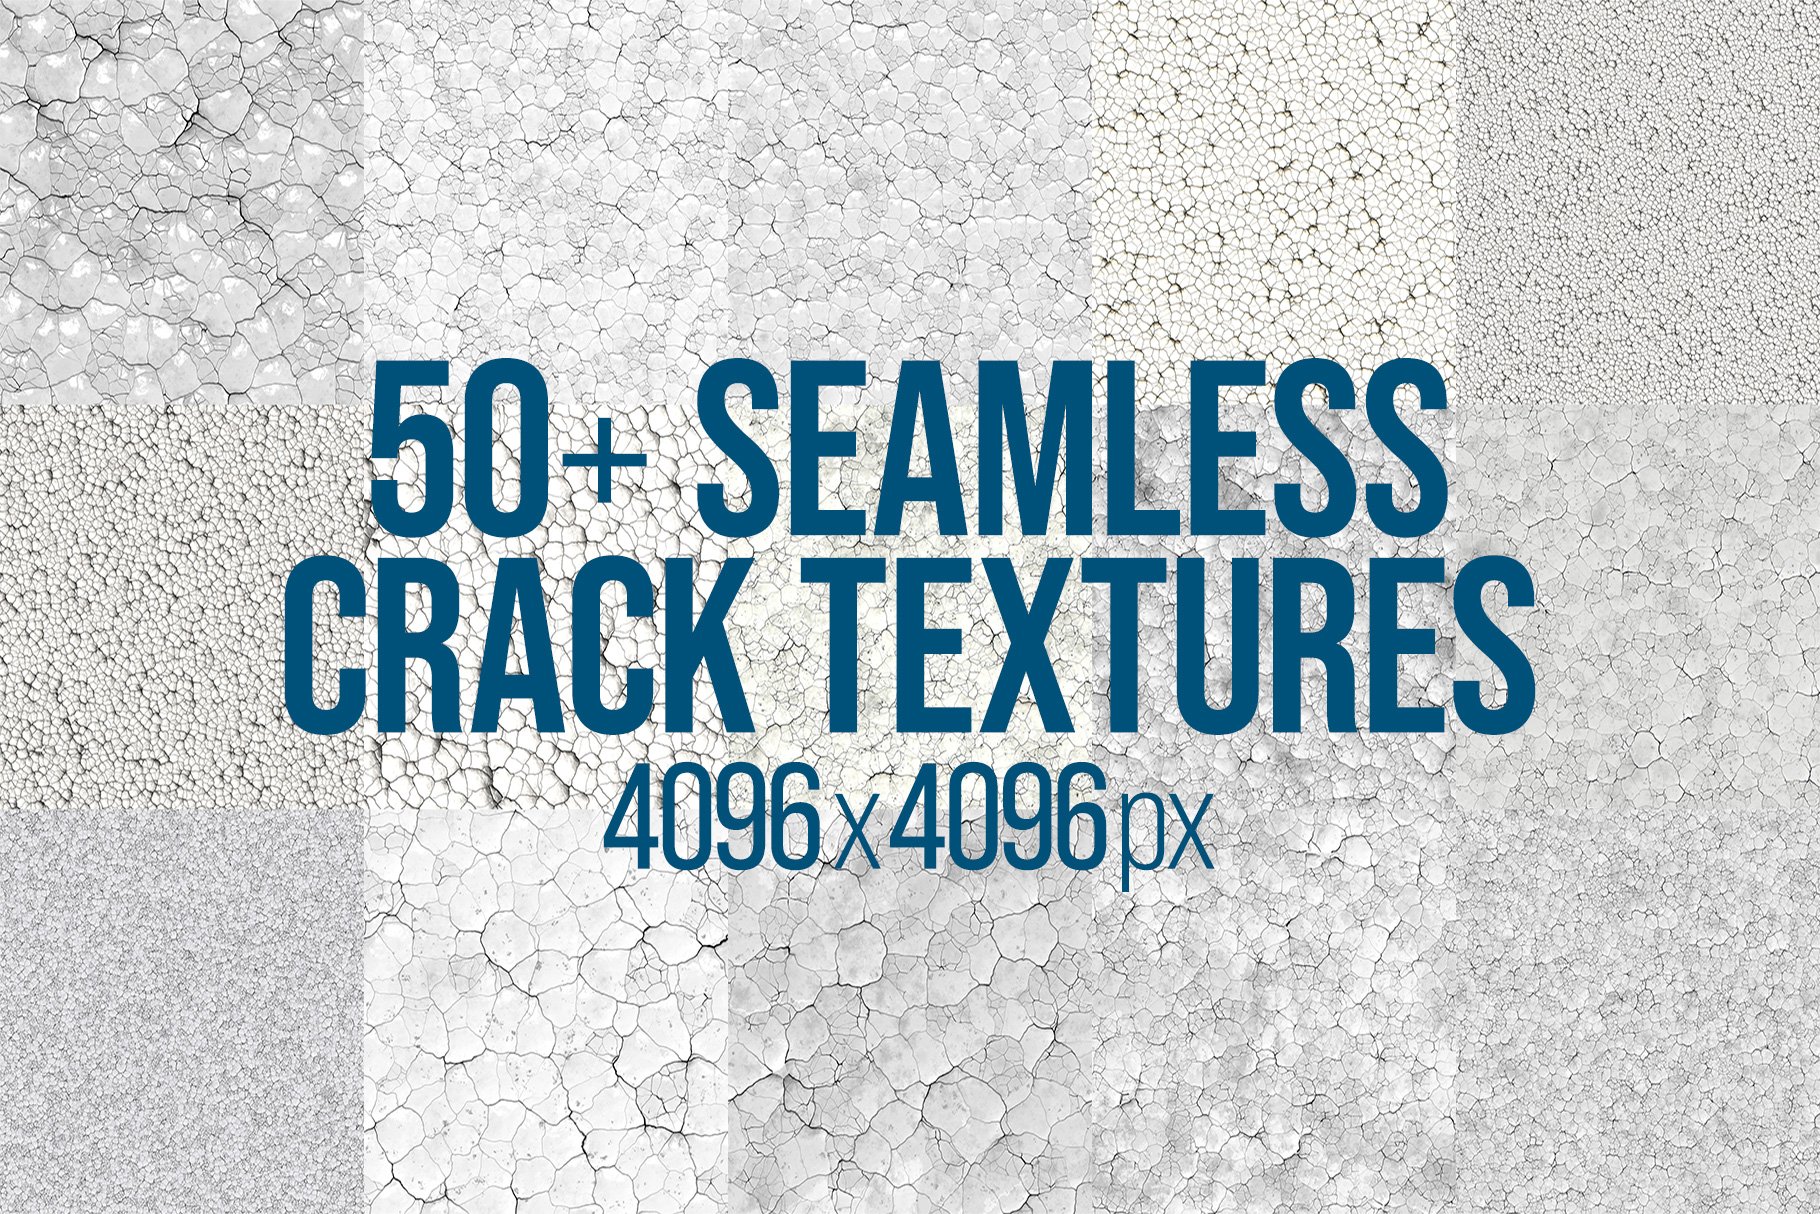 50+ Seamless Crack Textures cover image.